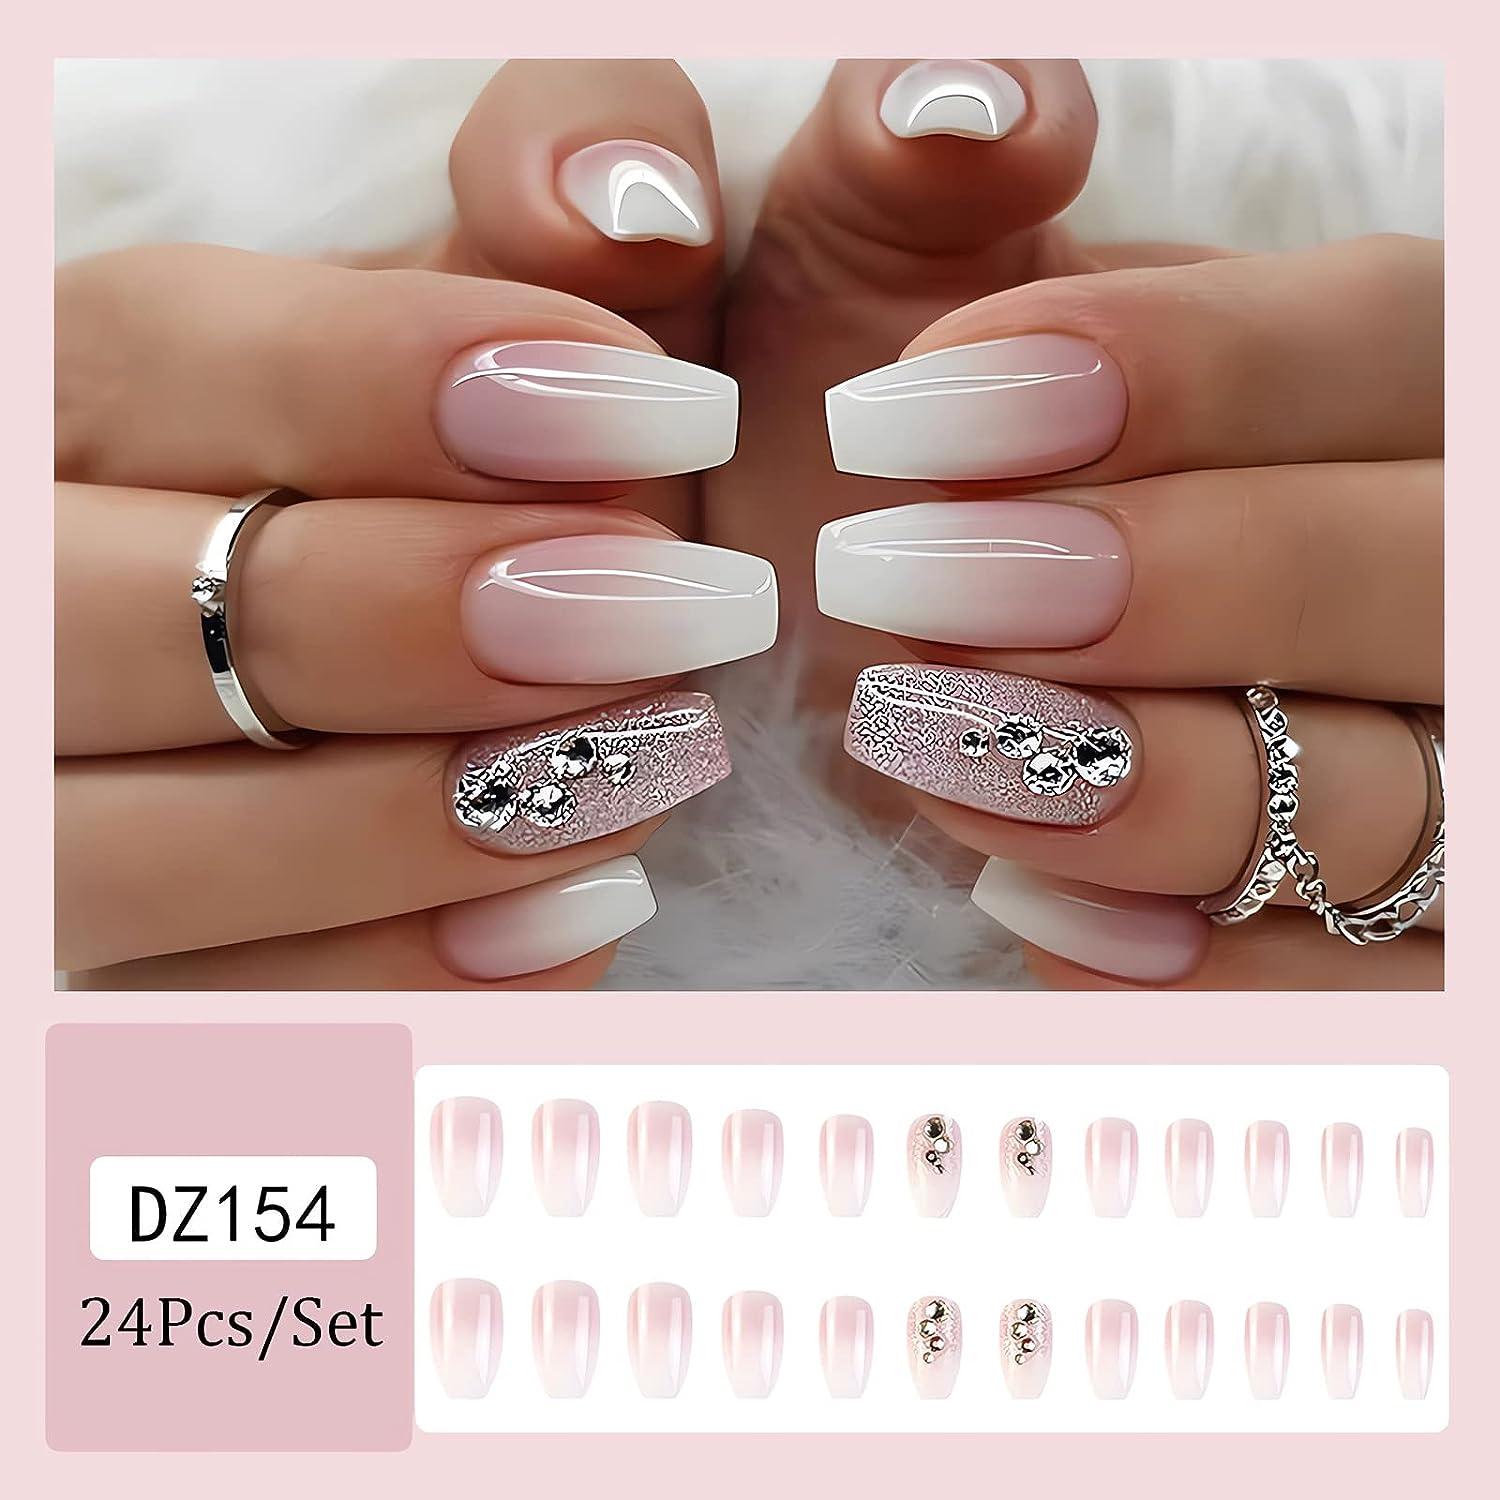 33 Way to Wear Stylish Nails : Mismatched glitter and pink coffin nails